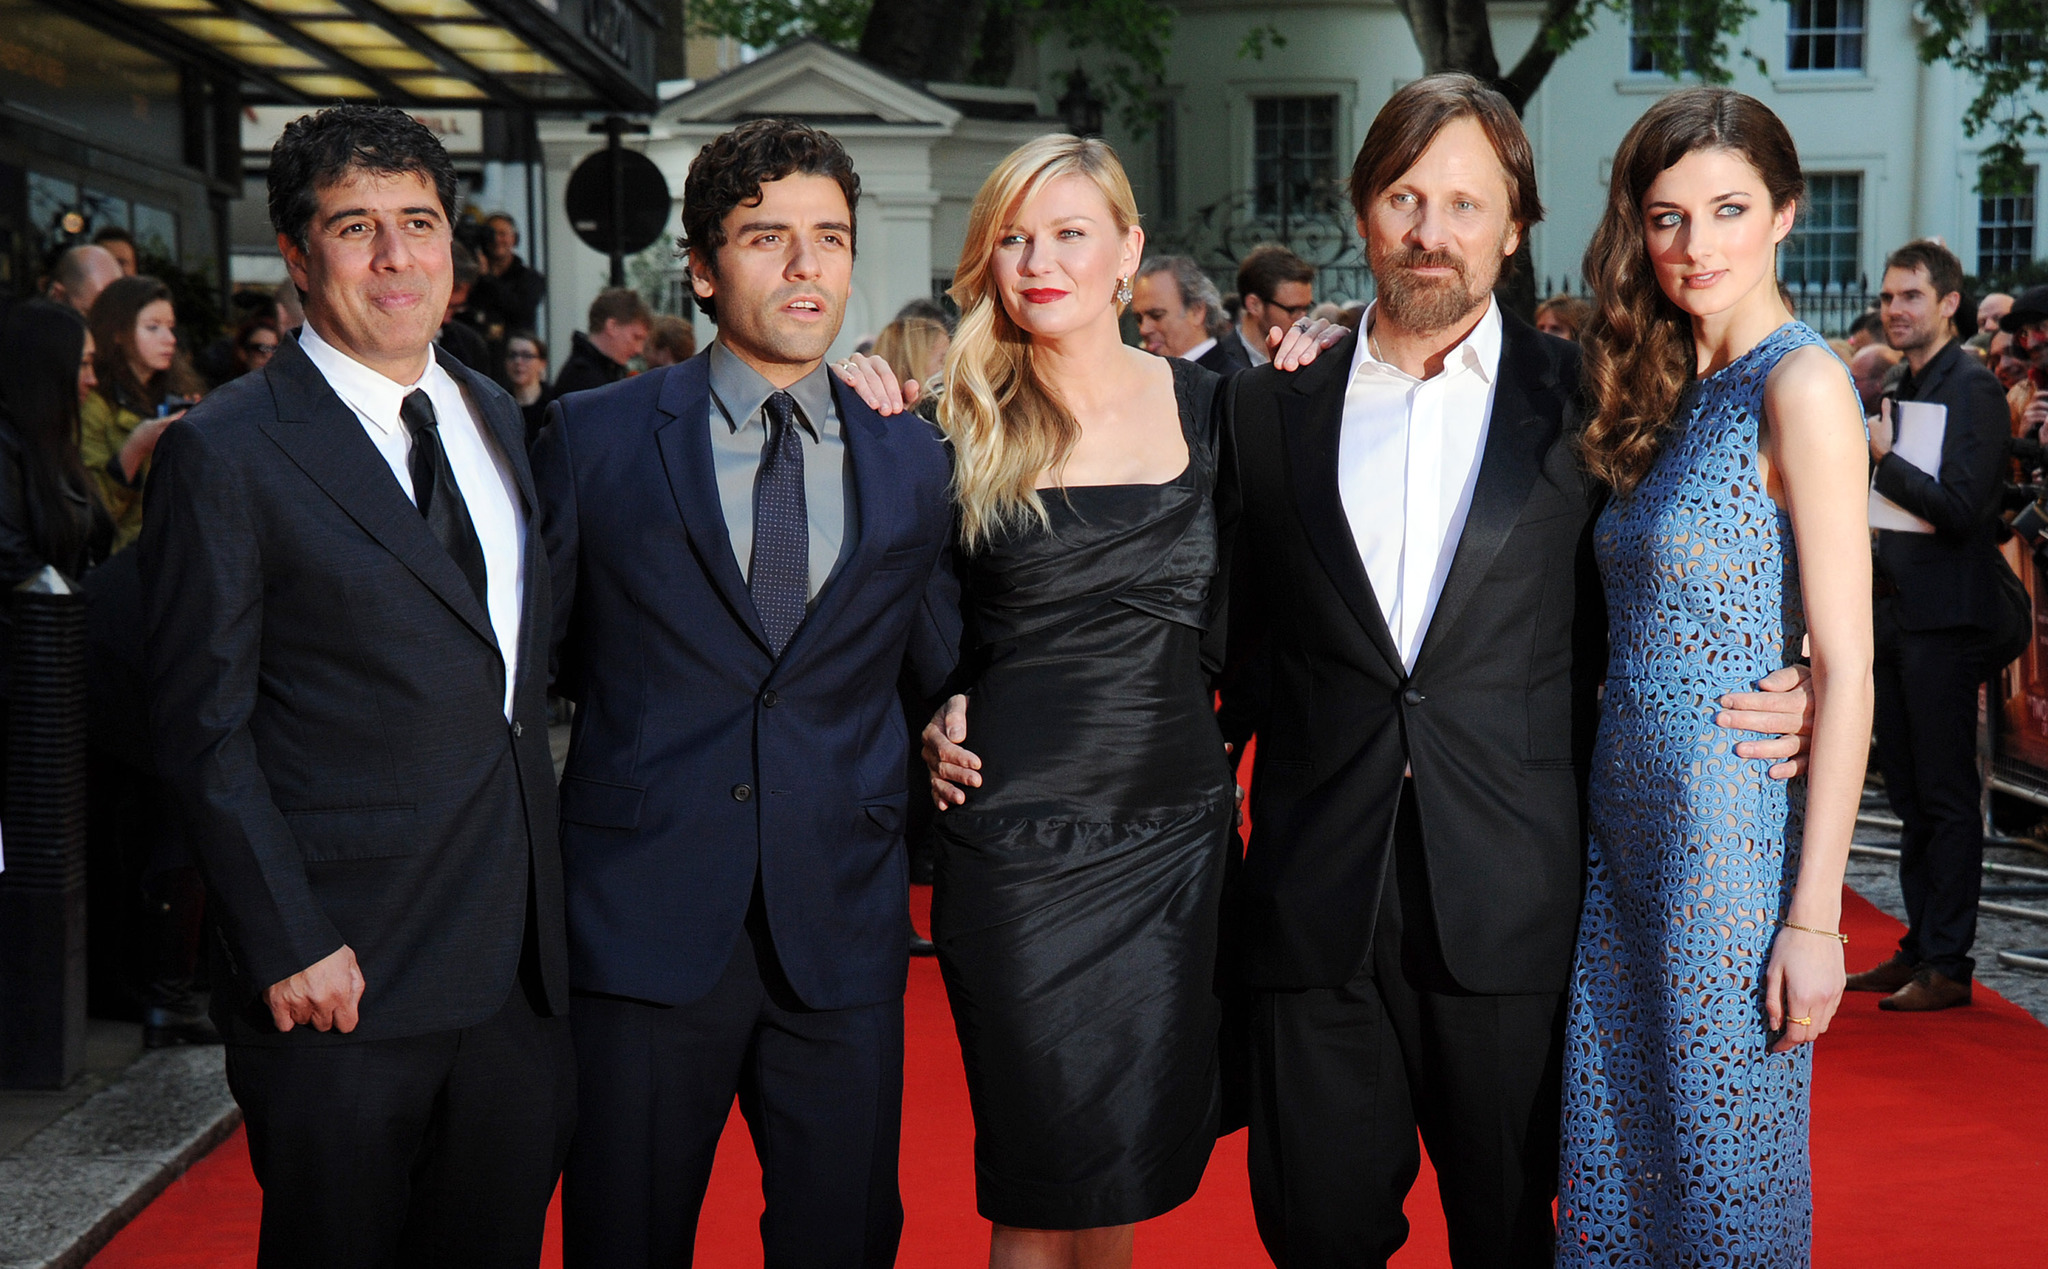 Kirsten Dunst, Viggo Mortensen, Hossein Amini, Daisy Bevan and Oscar Isaac at event of The Two Faces of January (2014)